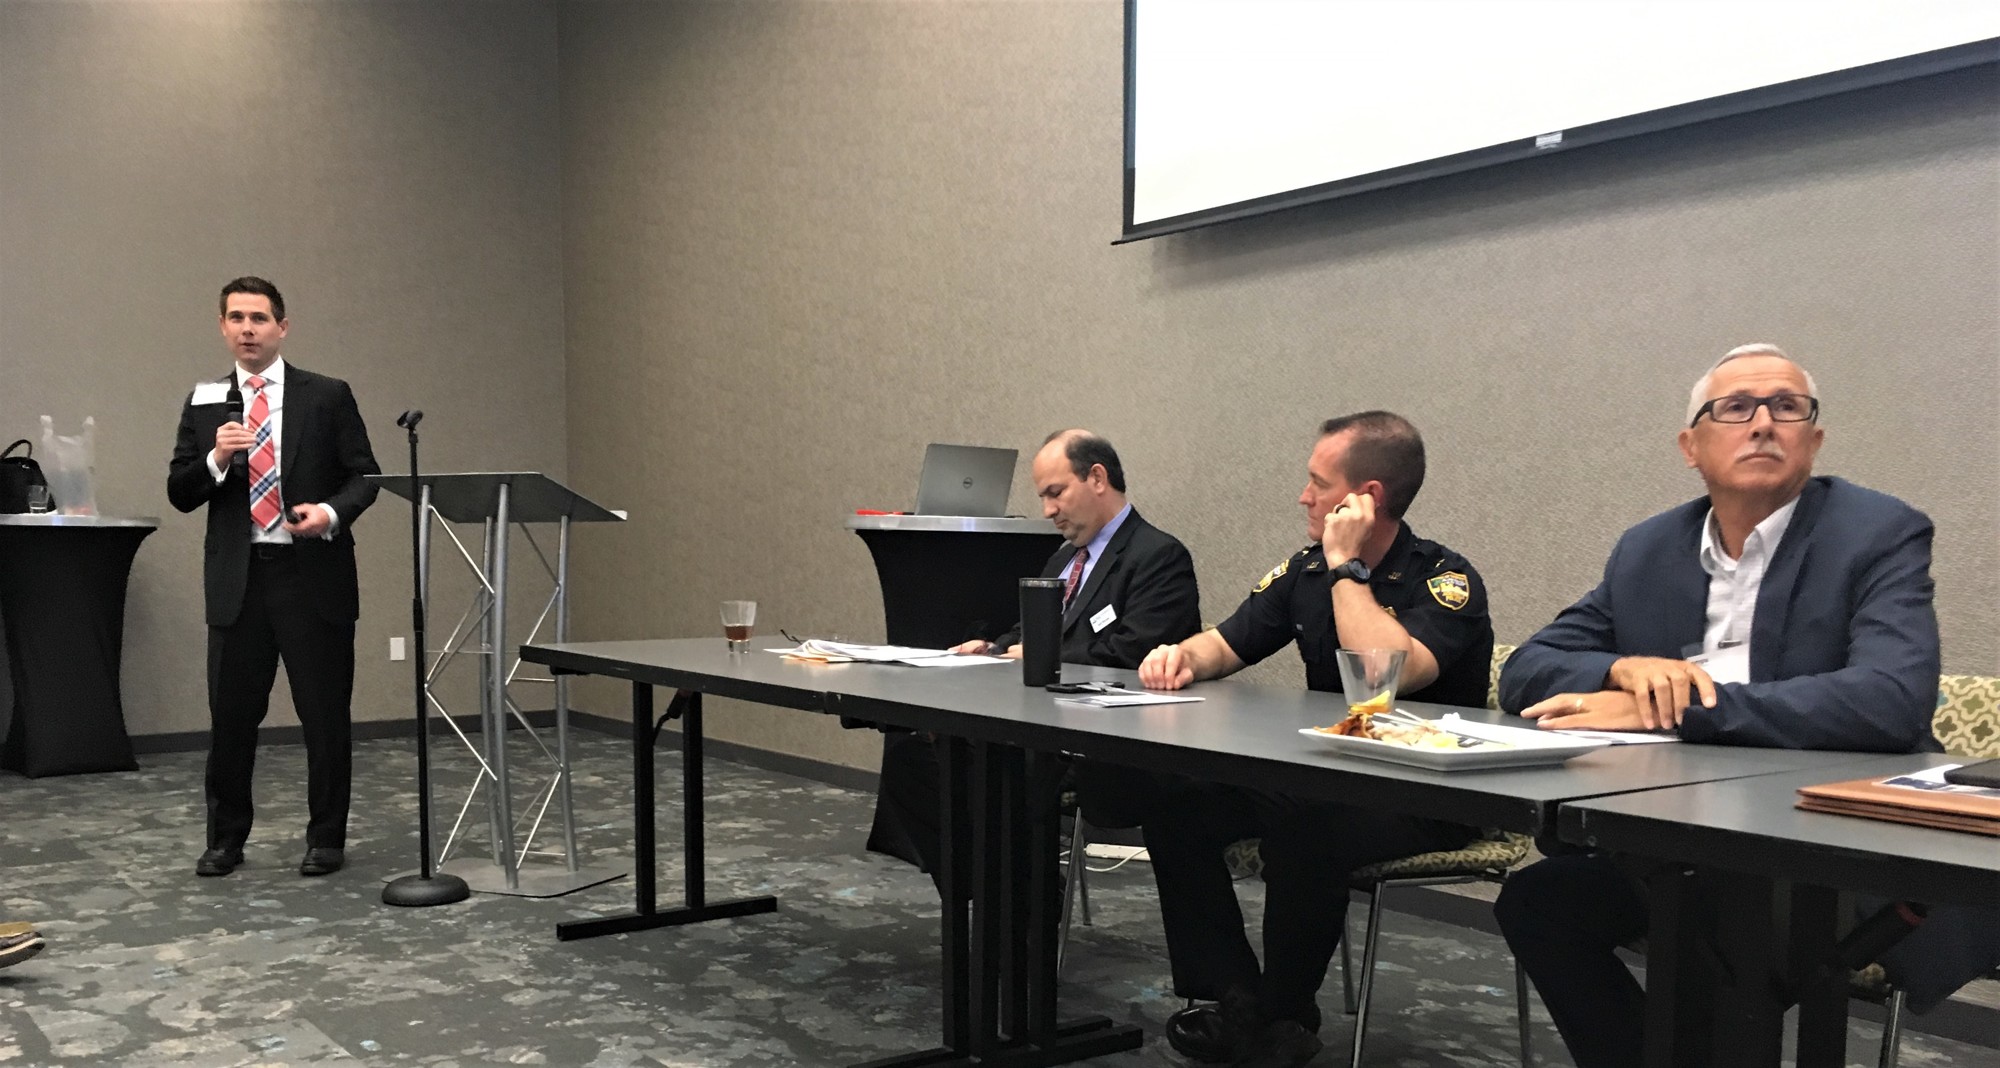 Kyle Dorsey, vice president of operations for Baptist Medical Center Jacksonville and Wolfson Children’s Hospital, speaks at the panel discussion.